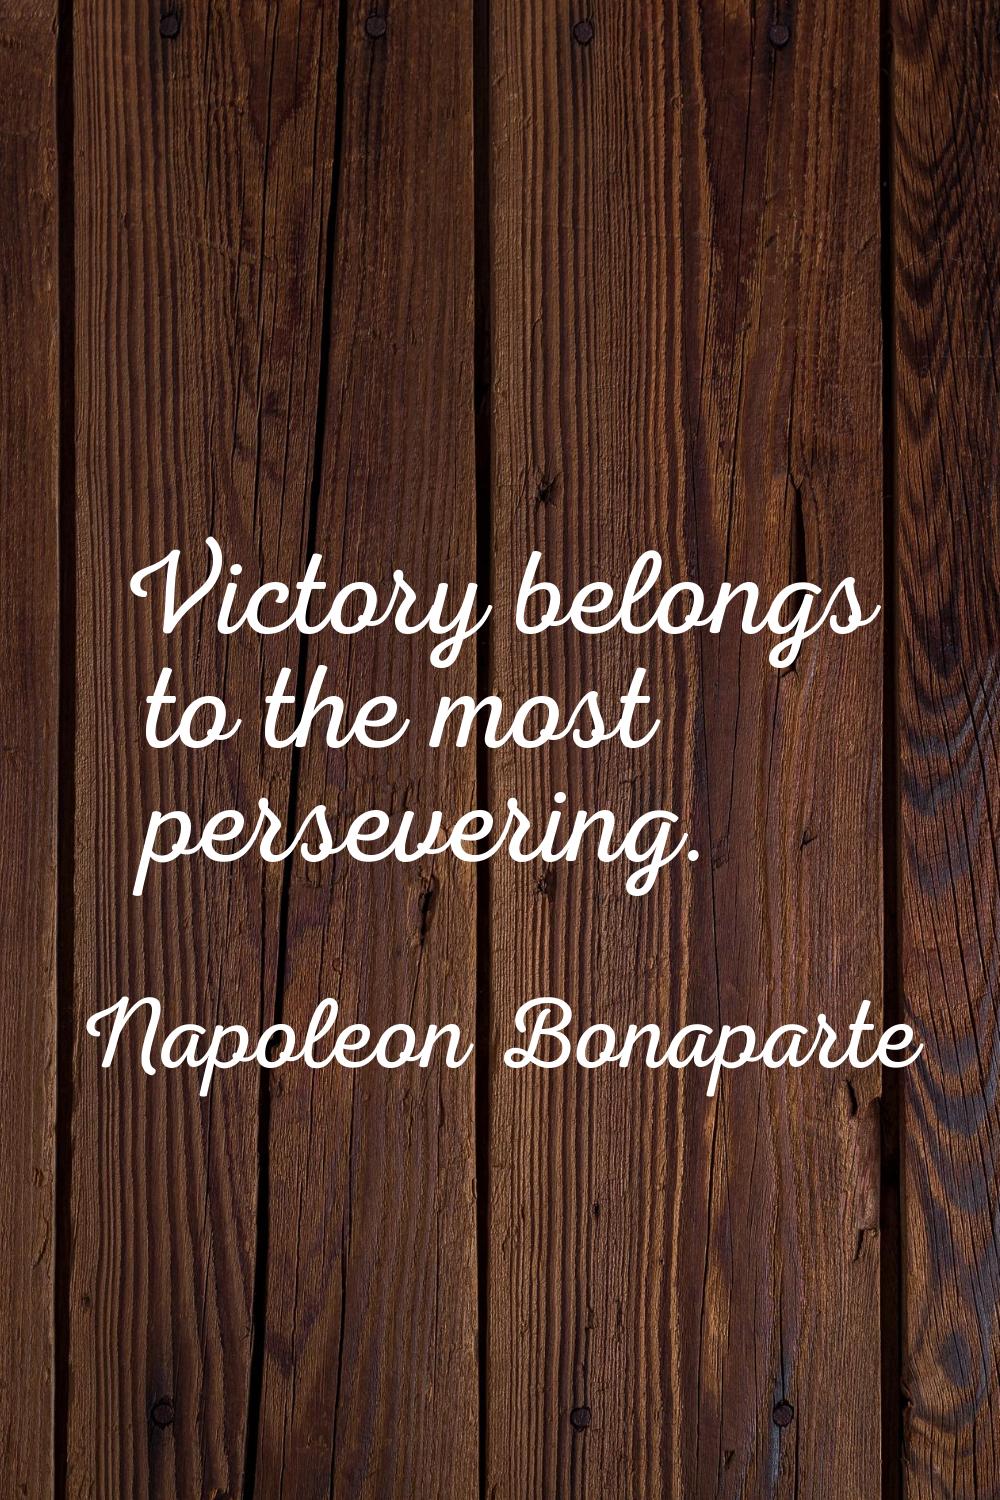 Victory belongs to the most persevering.